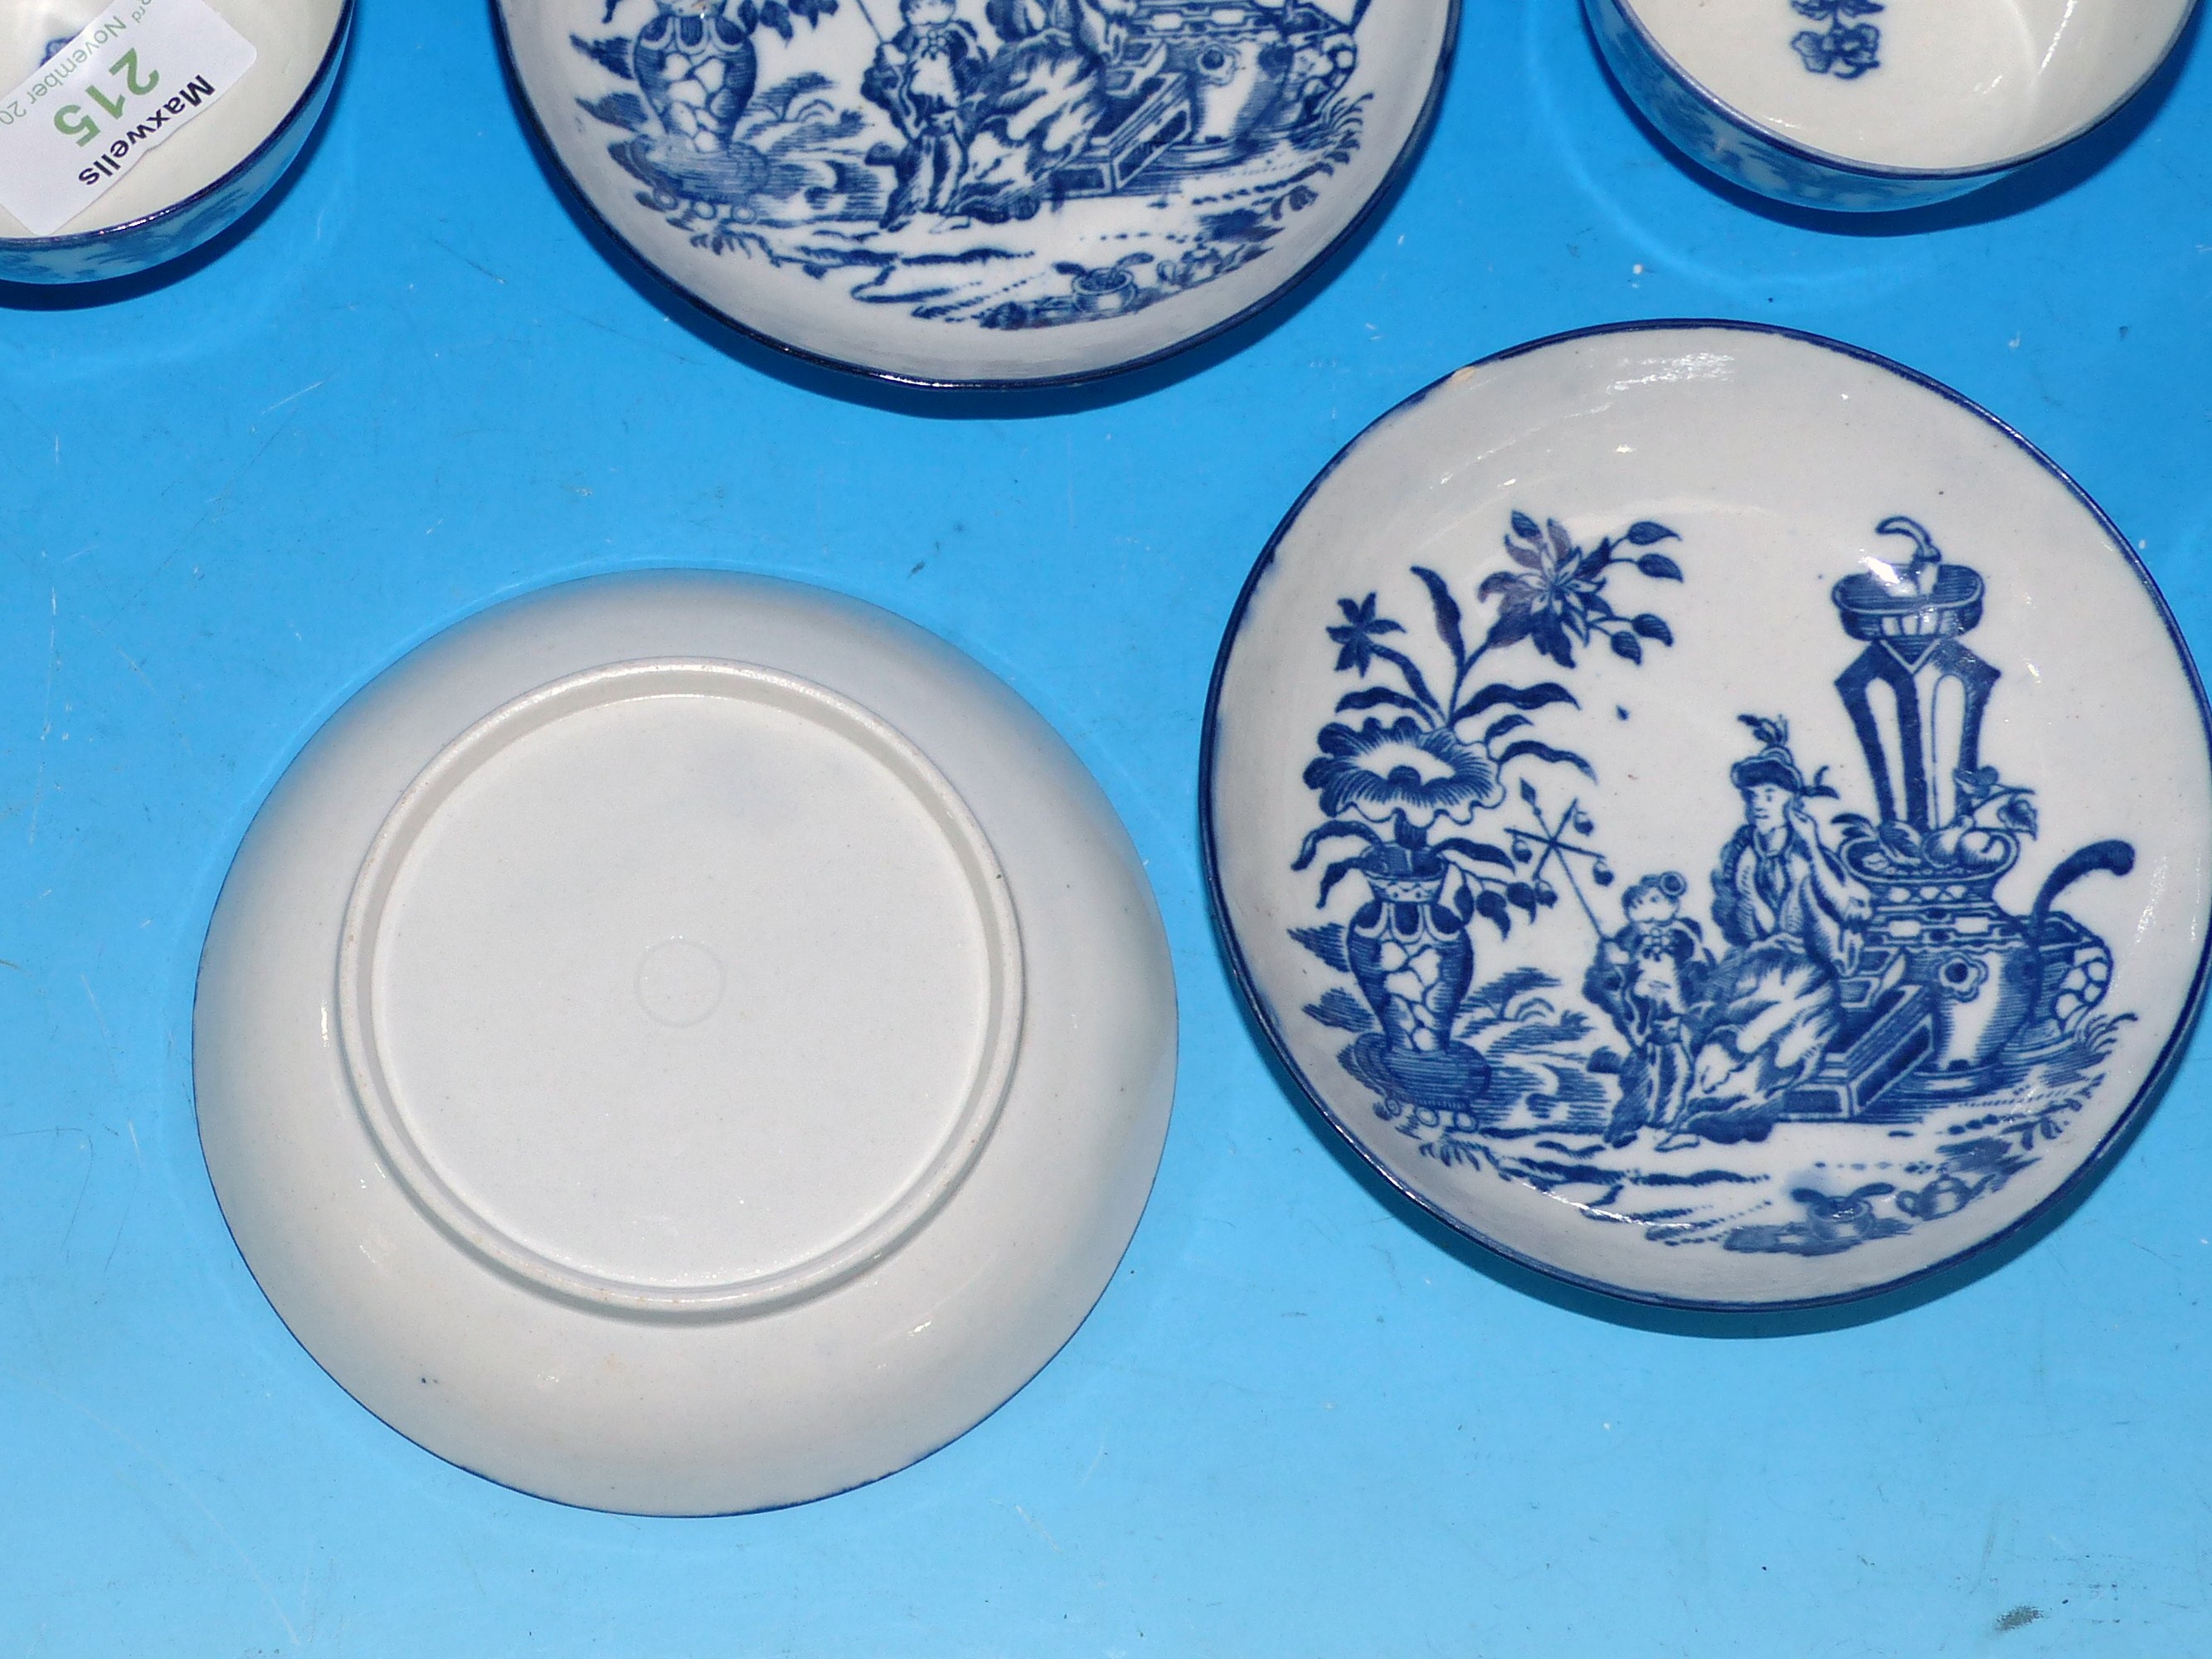 A set of 4 late 18th century English porcelain tea bowls and 3 saucers with blue transfer printed - Image 2 of 2